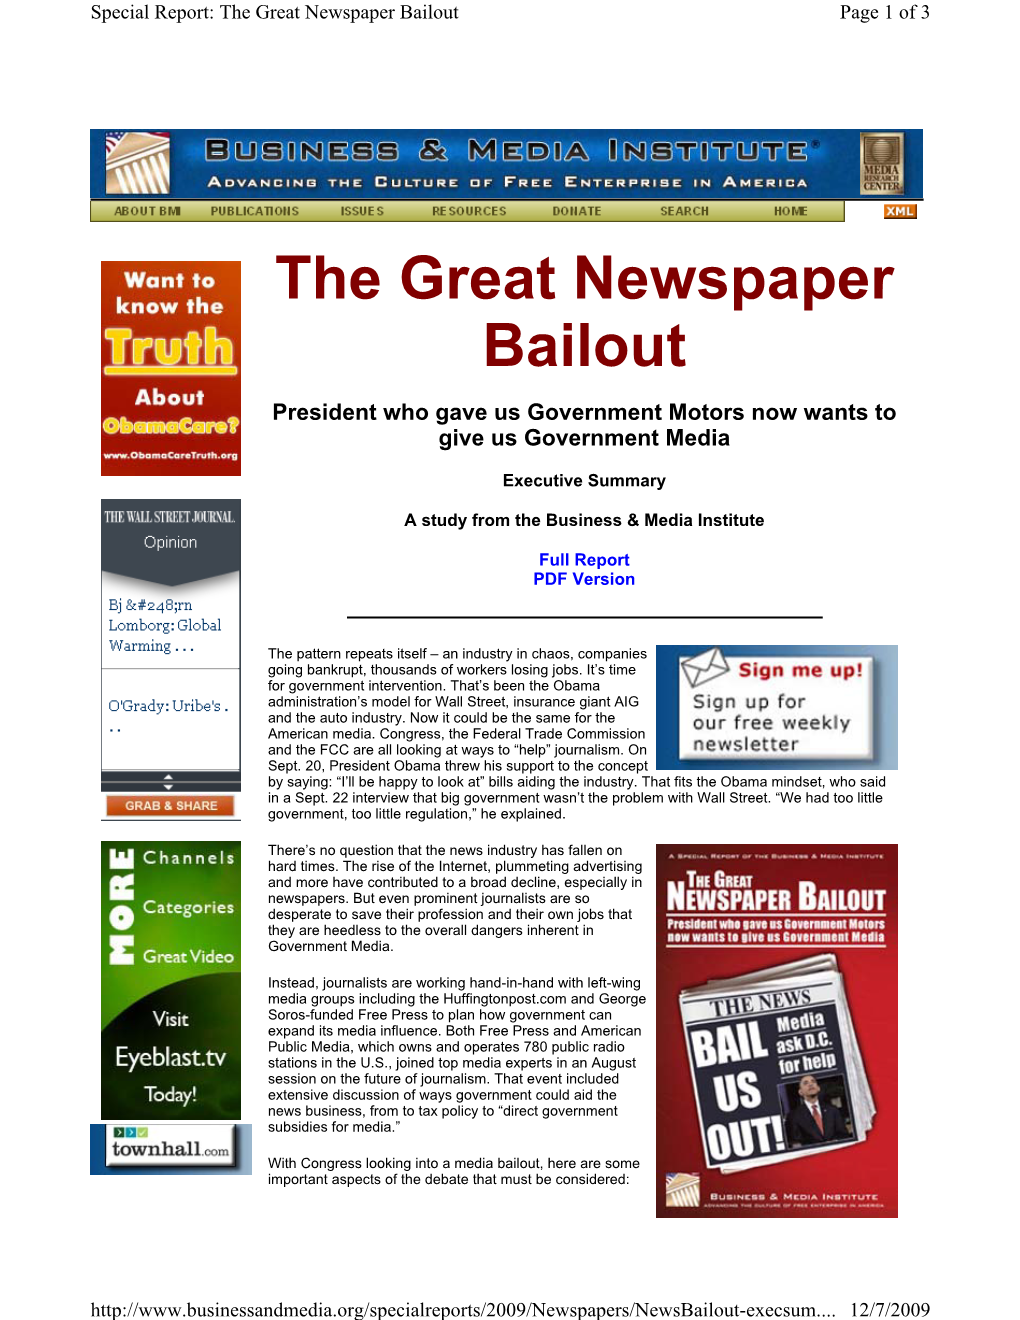 The Great Newspaper Bailout Page 1 of 3